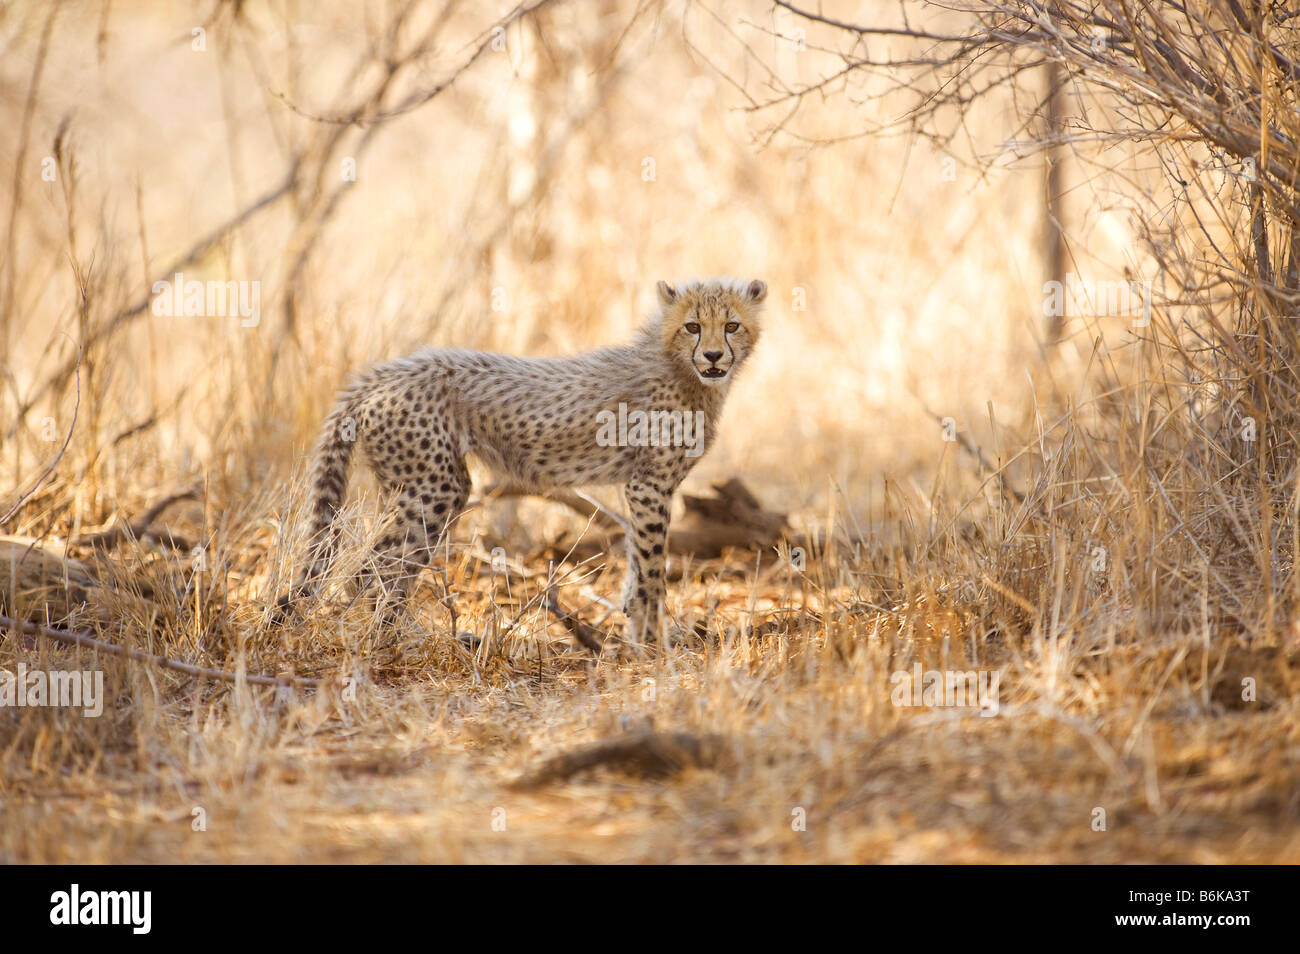 WILDLIFE wild cheetah gepard young baby infant cub Acinonyx jubatus stand standing southafrica south-afrika wilderness south afr Stock Photo